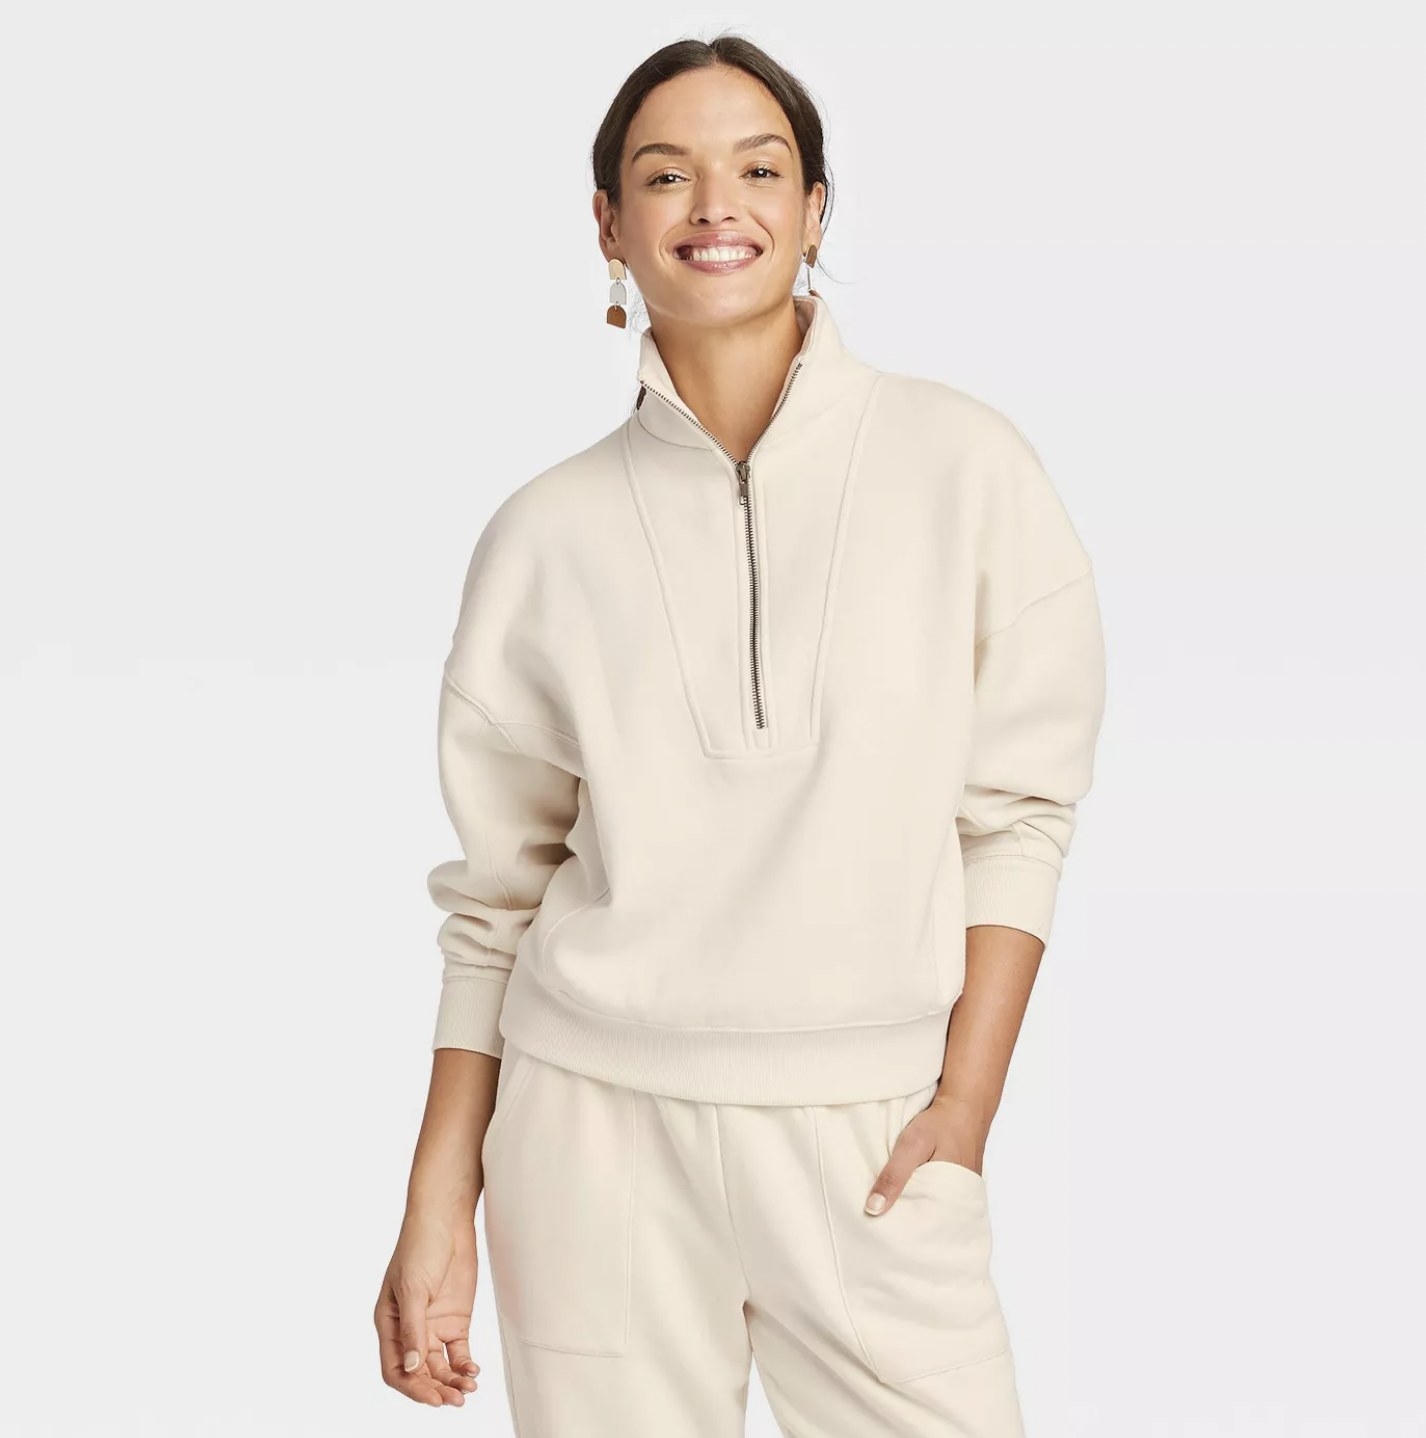 31 Pieces Of Clothing From Target You Can Comfortably Lounge In While ...